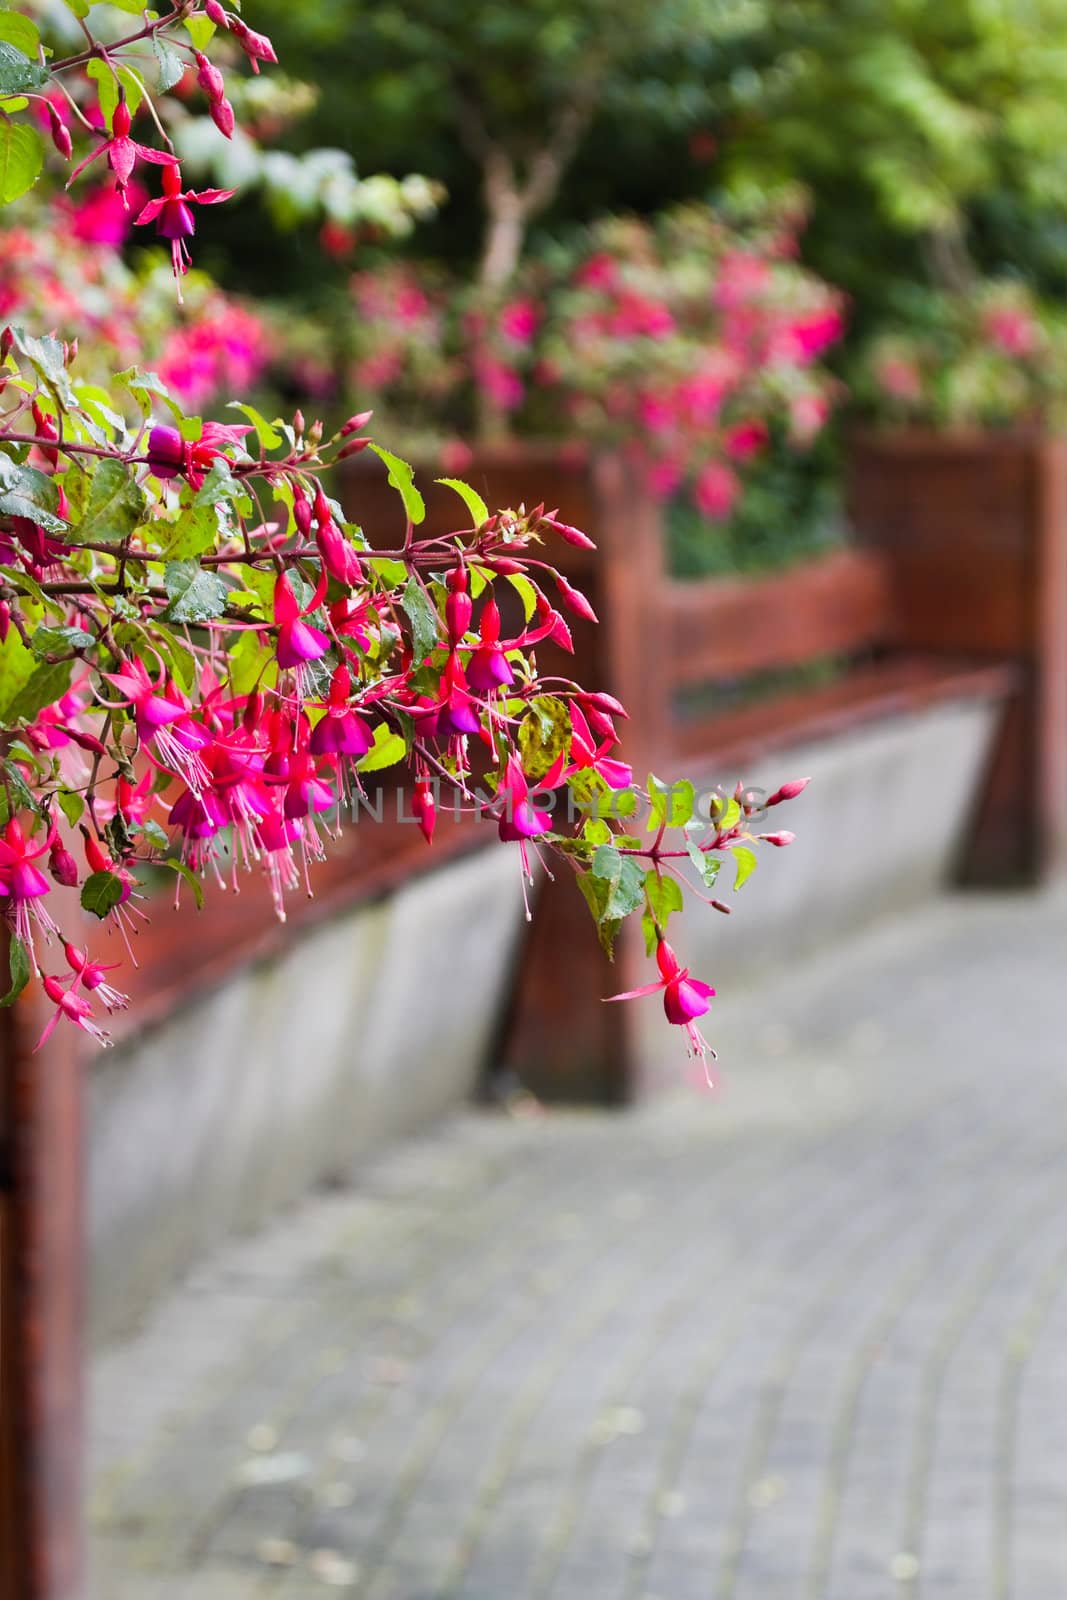 Benches in park with fuchsia flowers by Colette